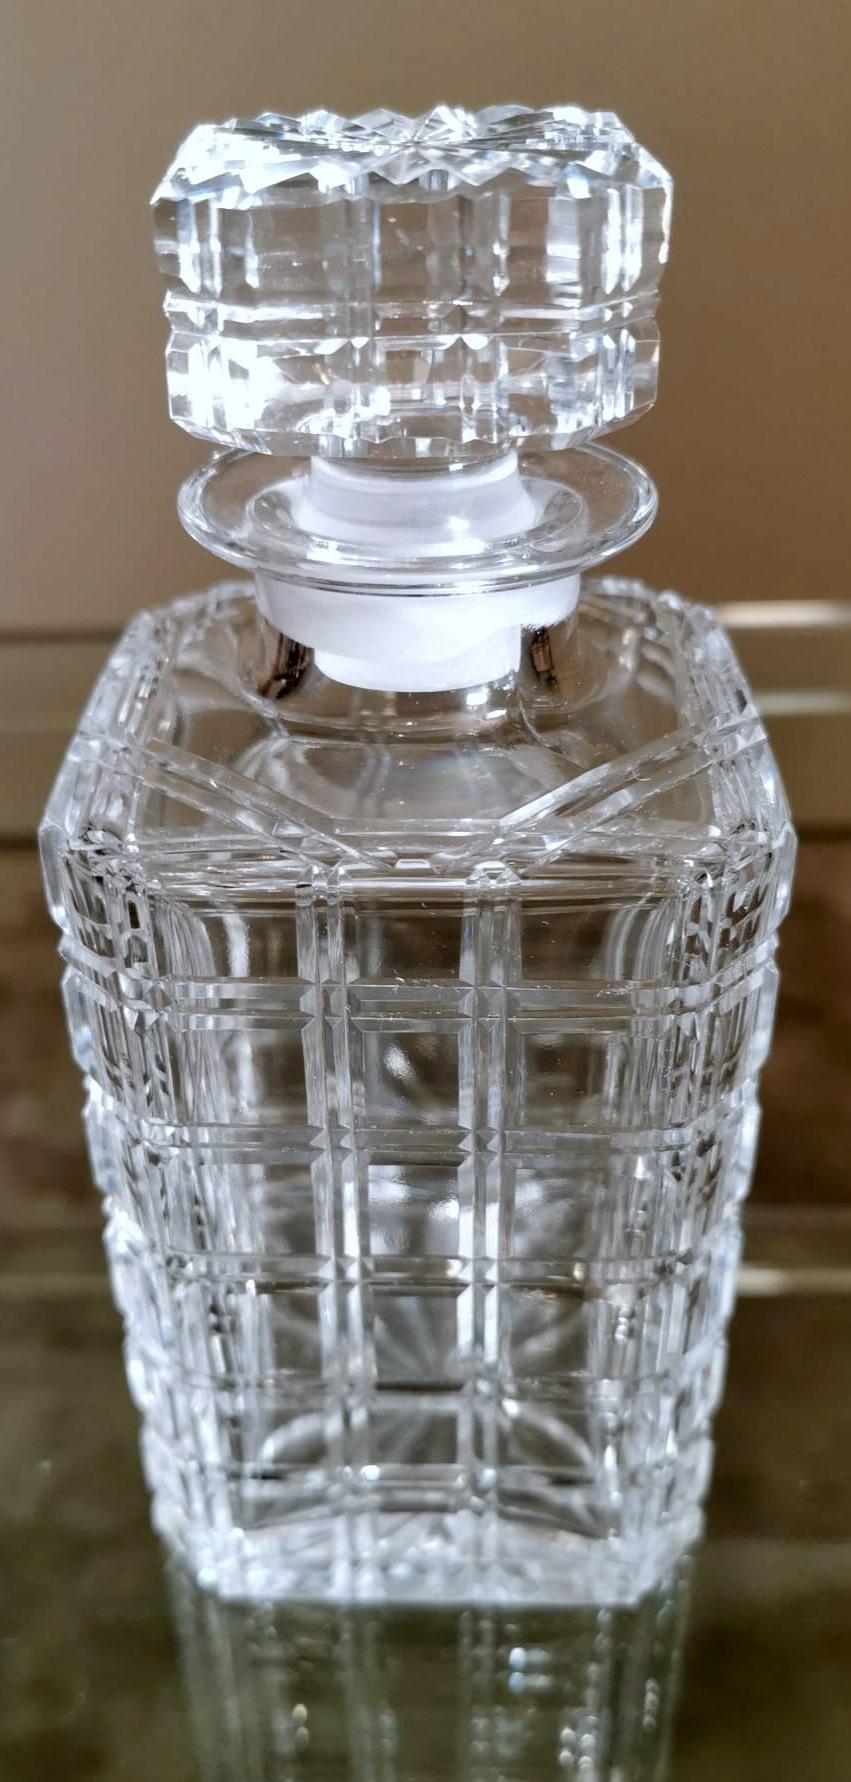 Italian Florentine Handcrafted Crystal Bottle Ground, Cut And Polished By Hand